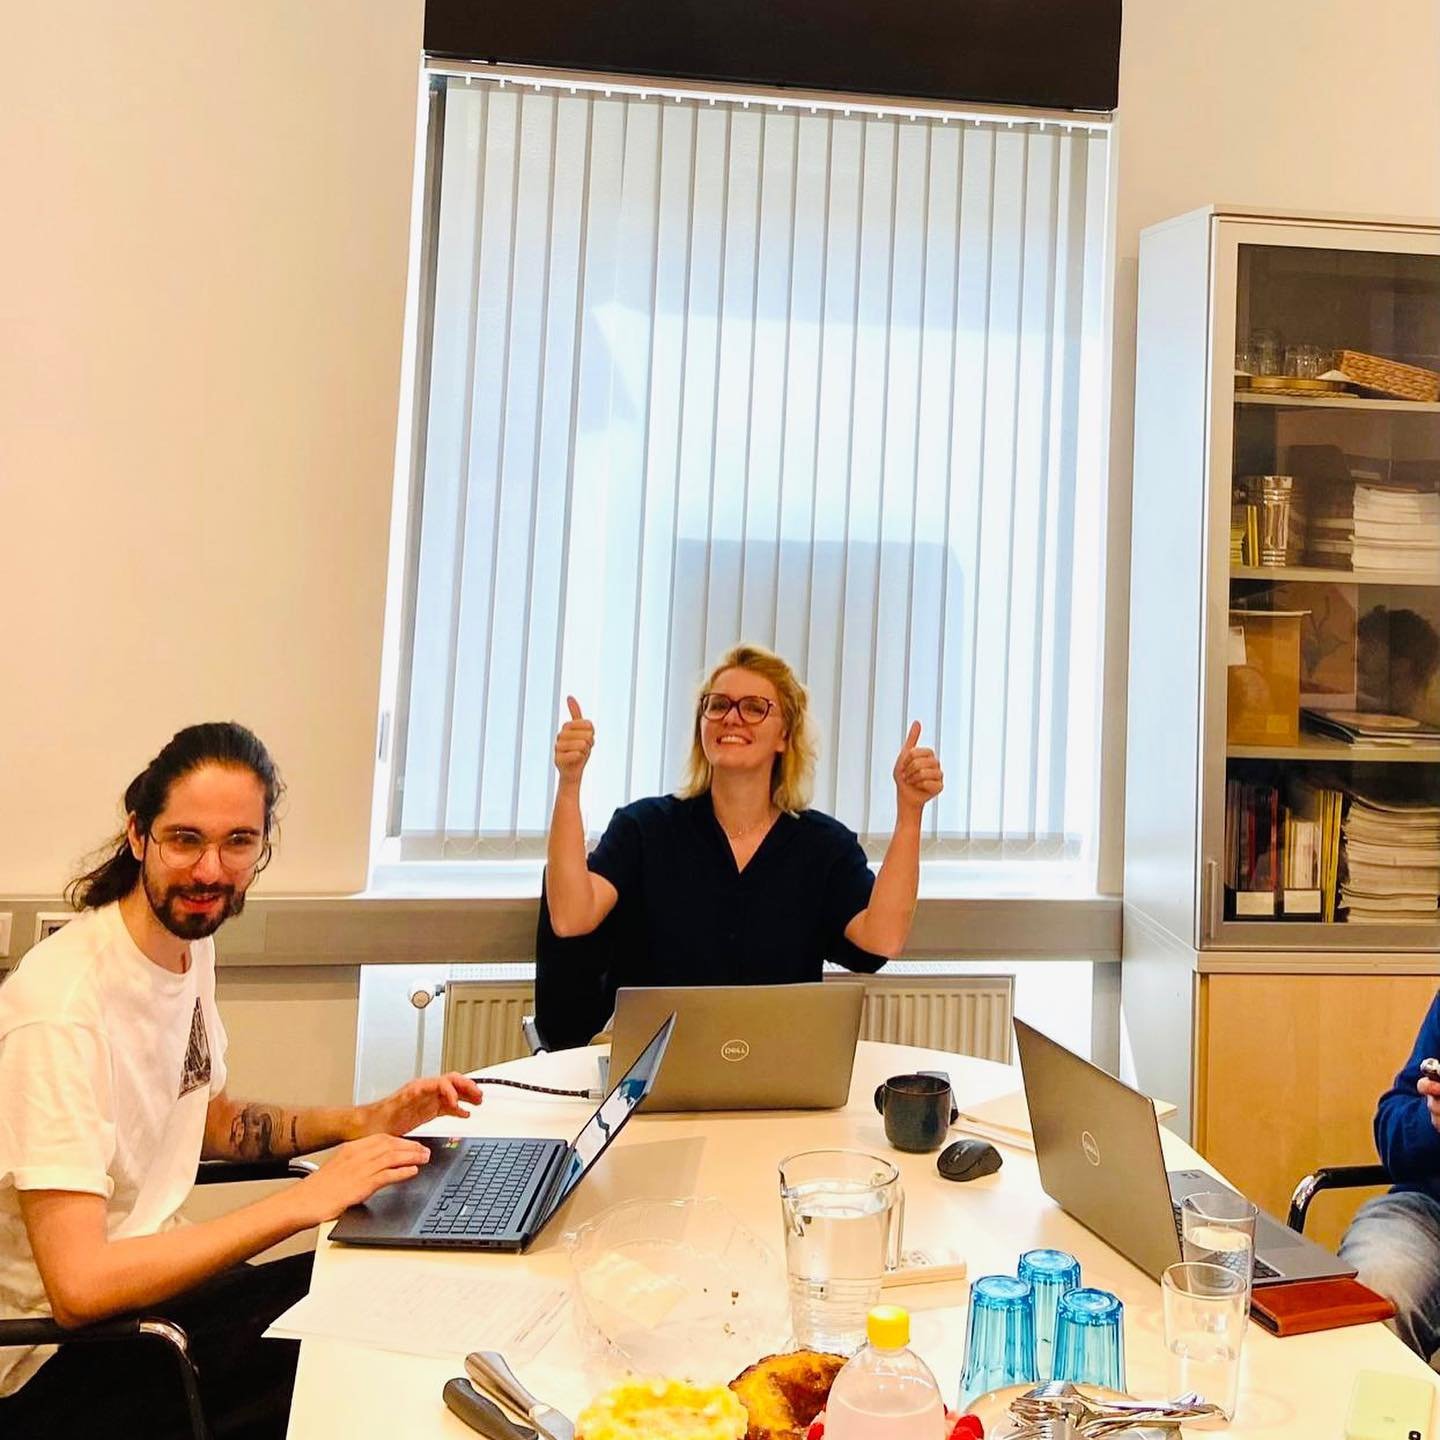 Dear students,

on April 15th there was our first HV-Sitzung this semester. During our meeting, we had meaningful discussions on several significant matters.

Our Chair Team &ndash; Justina, Lukas and Kejsi provided us with many insightful informatio